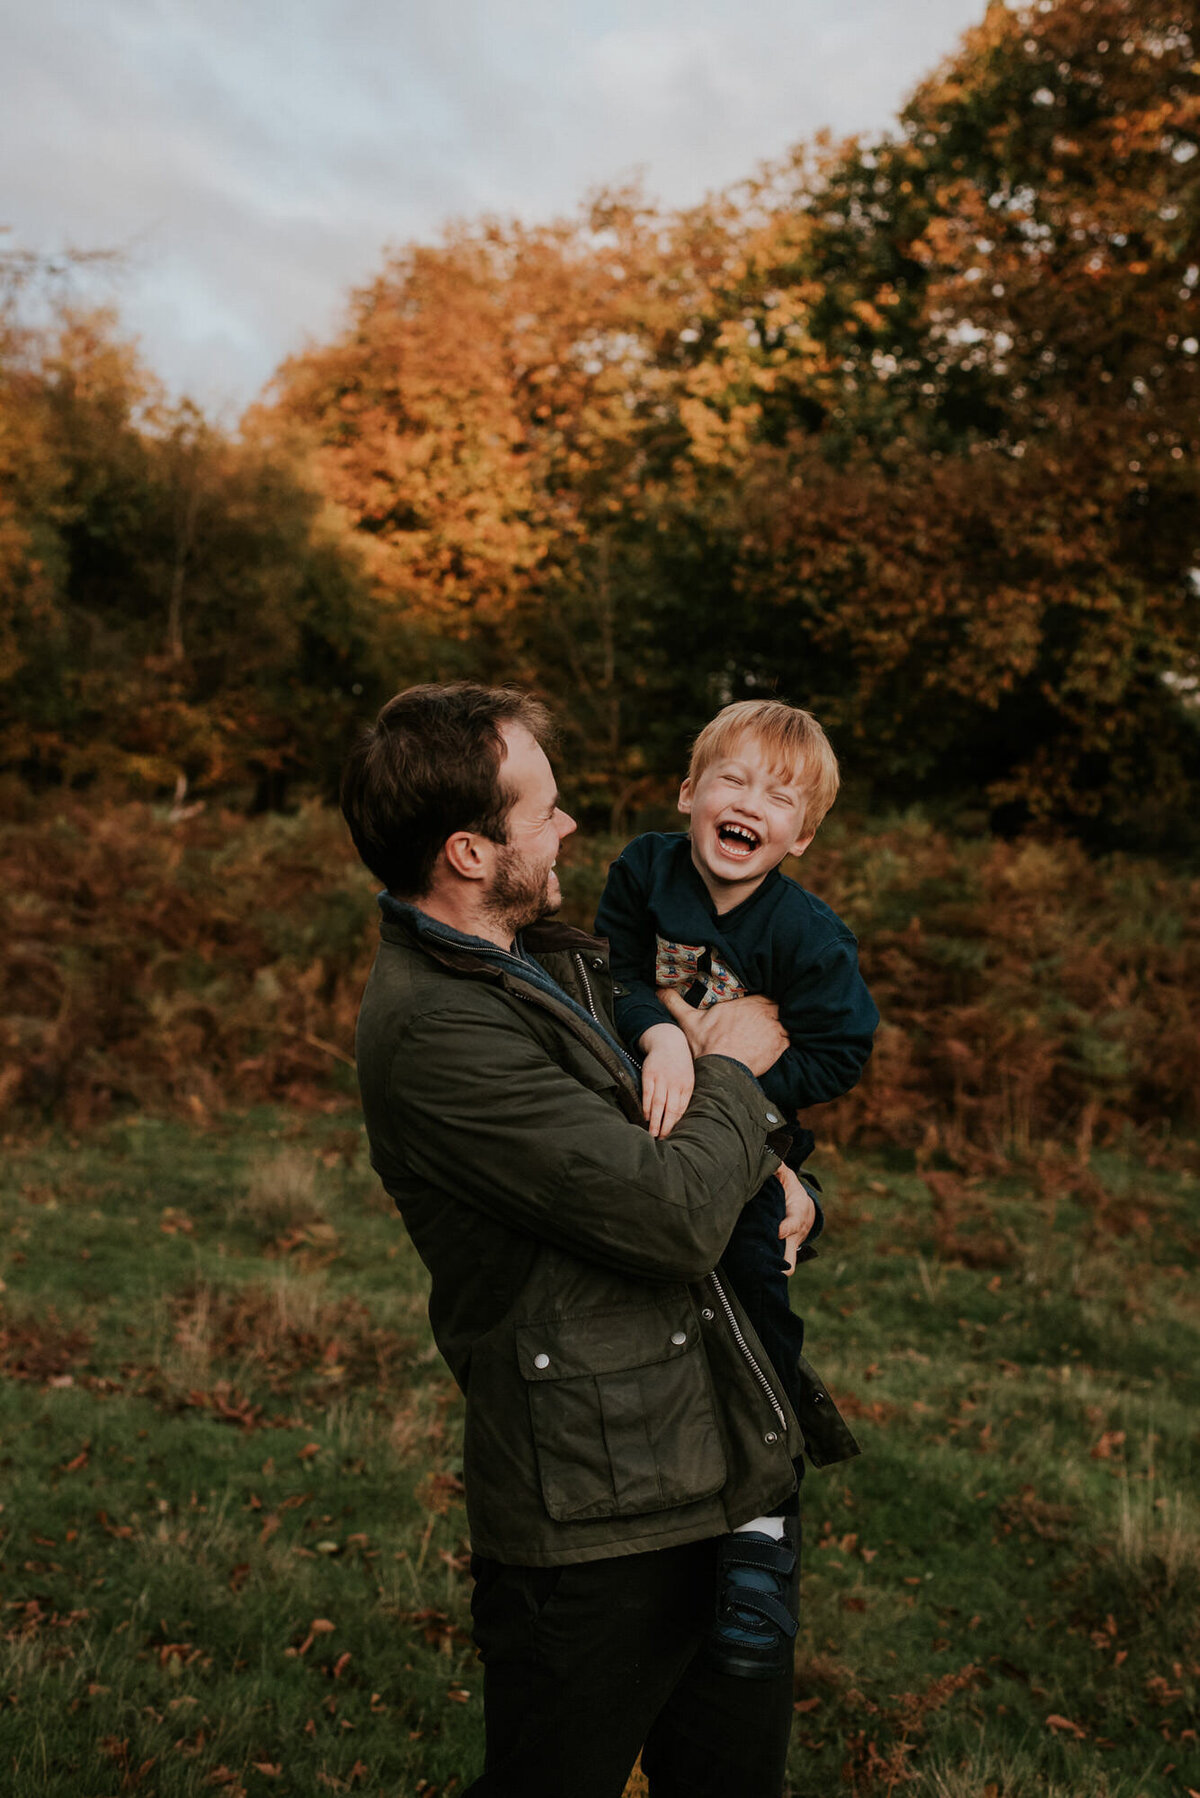 Father holding young son in autumn leaves